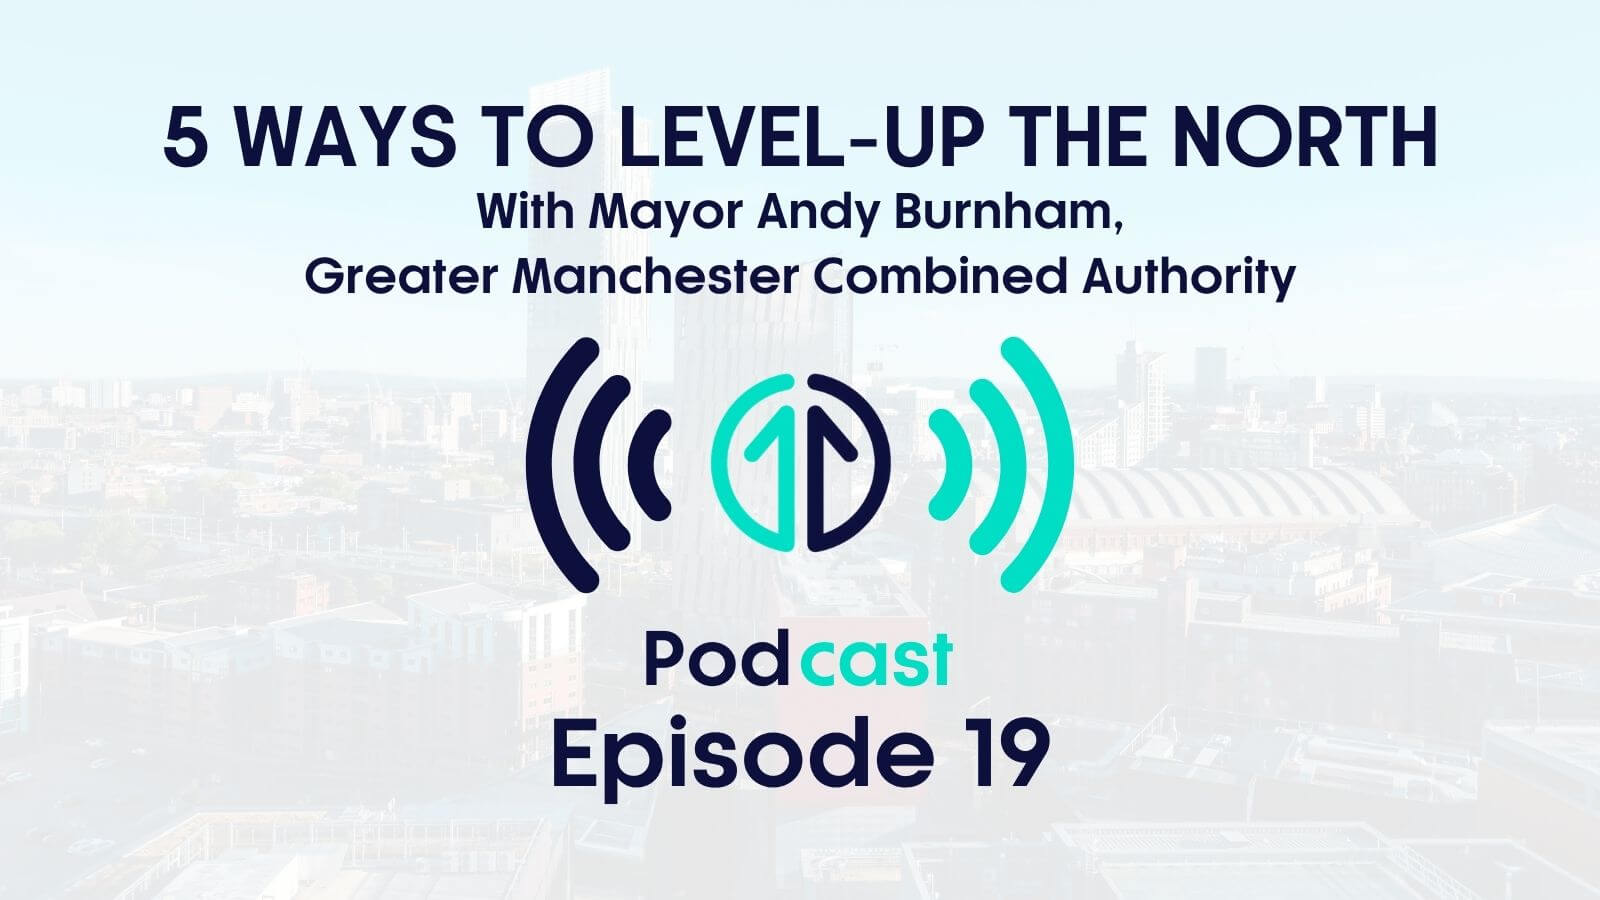 5 ways to level up the North with Mayor Andy Burnham, Greater Manchester Combined Authority | Episode 19